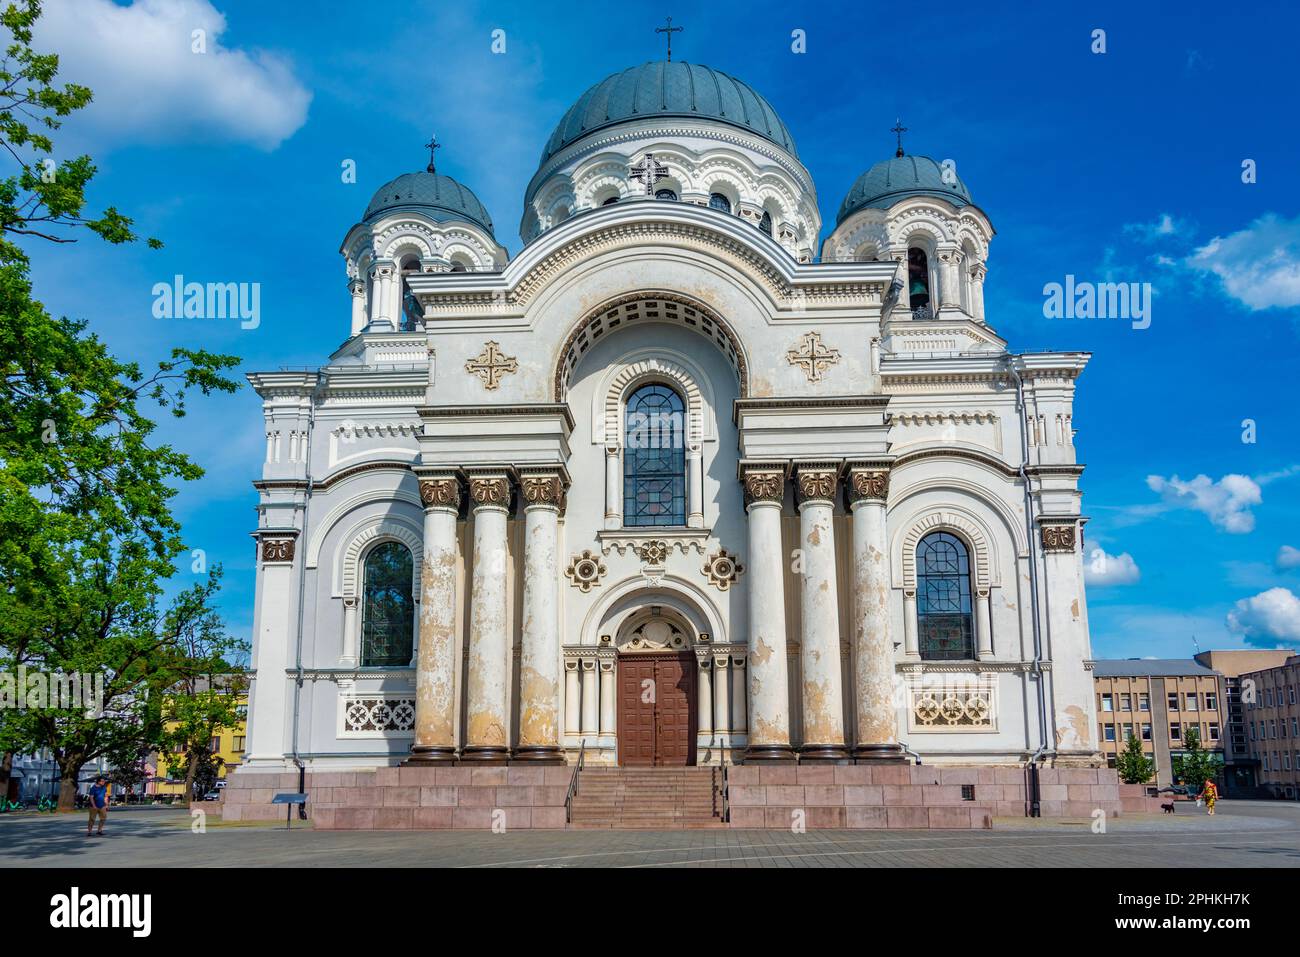 St. Michael the Archangel's Church in Kaunas, Lithuania. Stock Photo